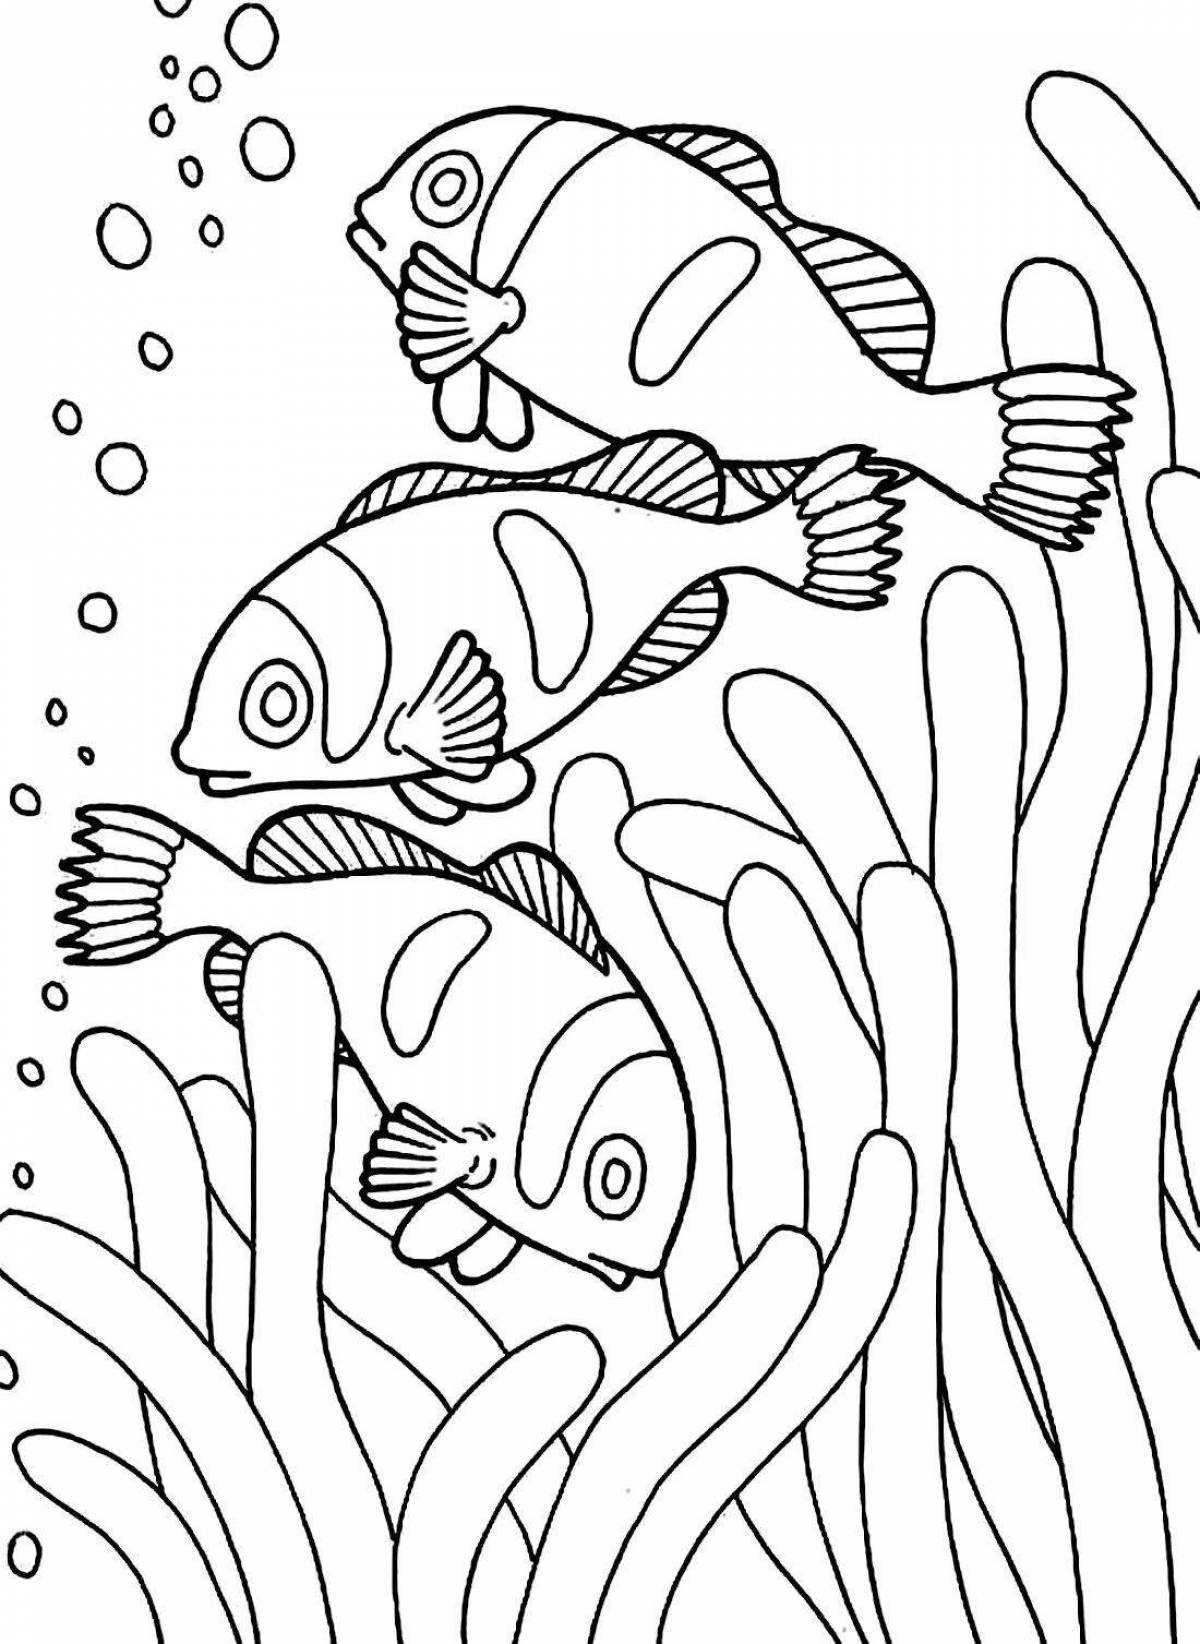 Majestic underwater world coloring book